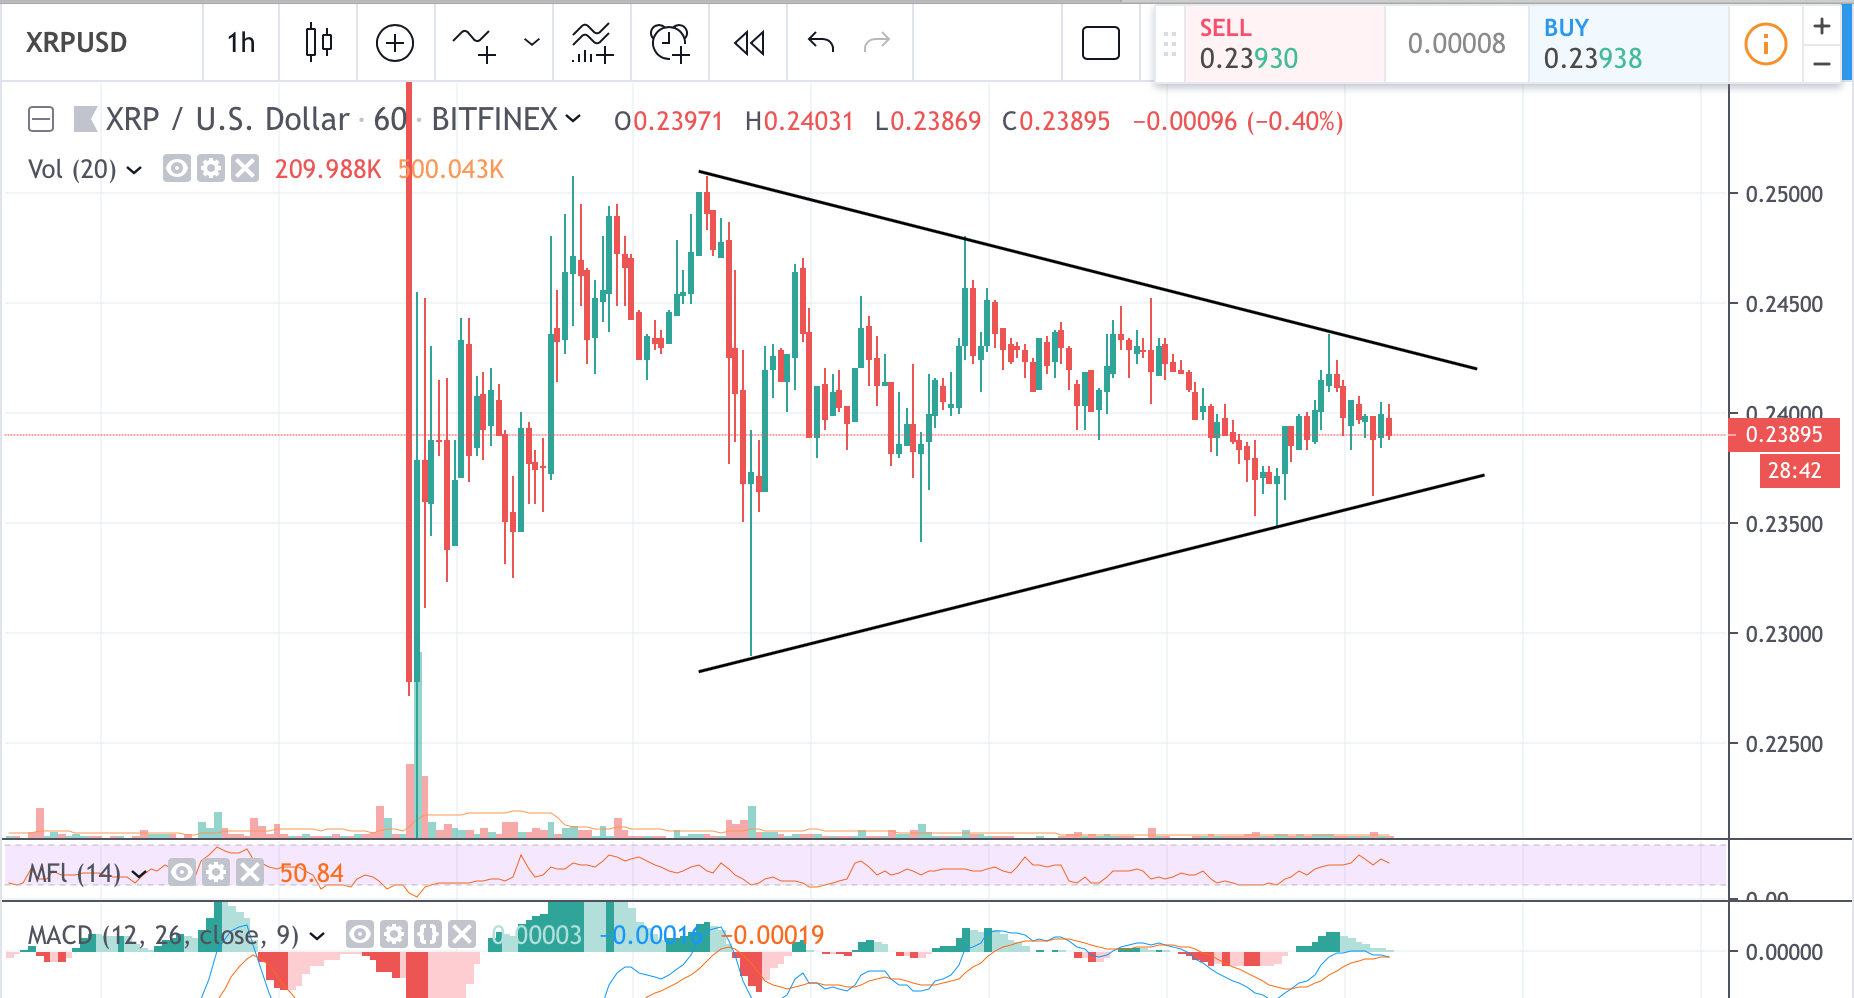 XRP/USD price is in narrowing trading channel